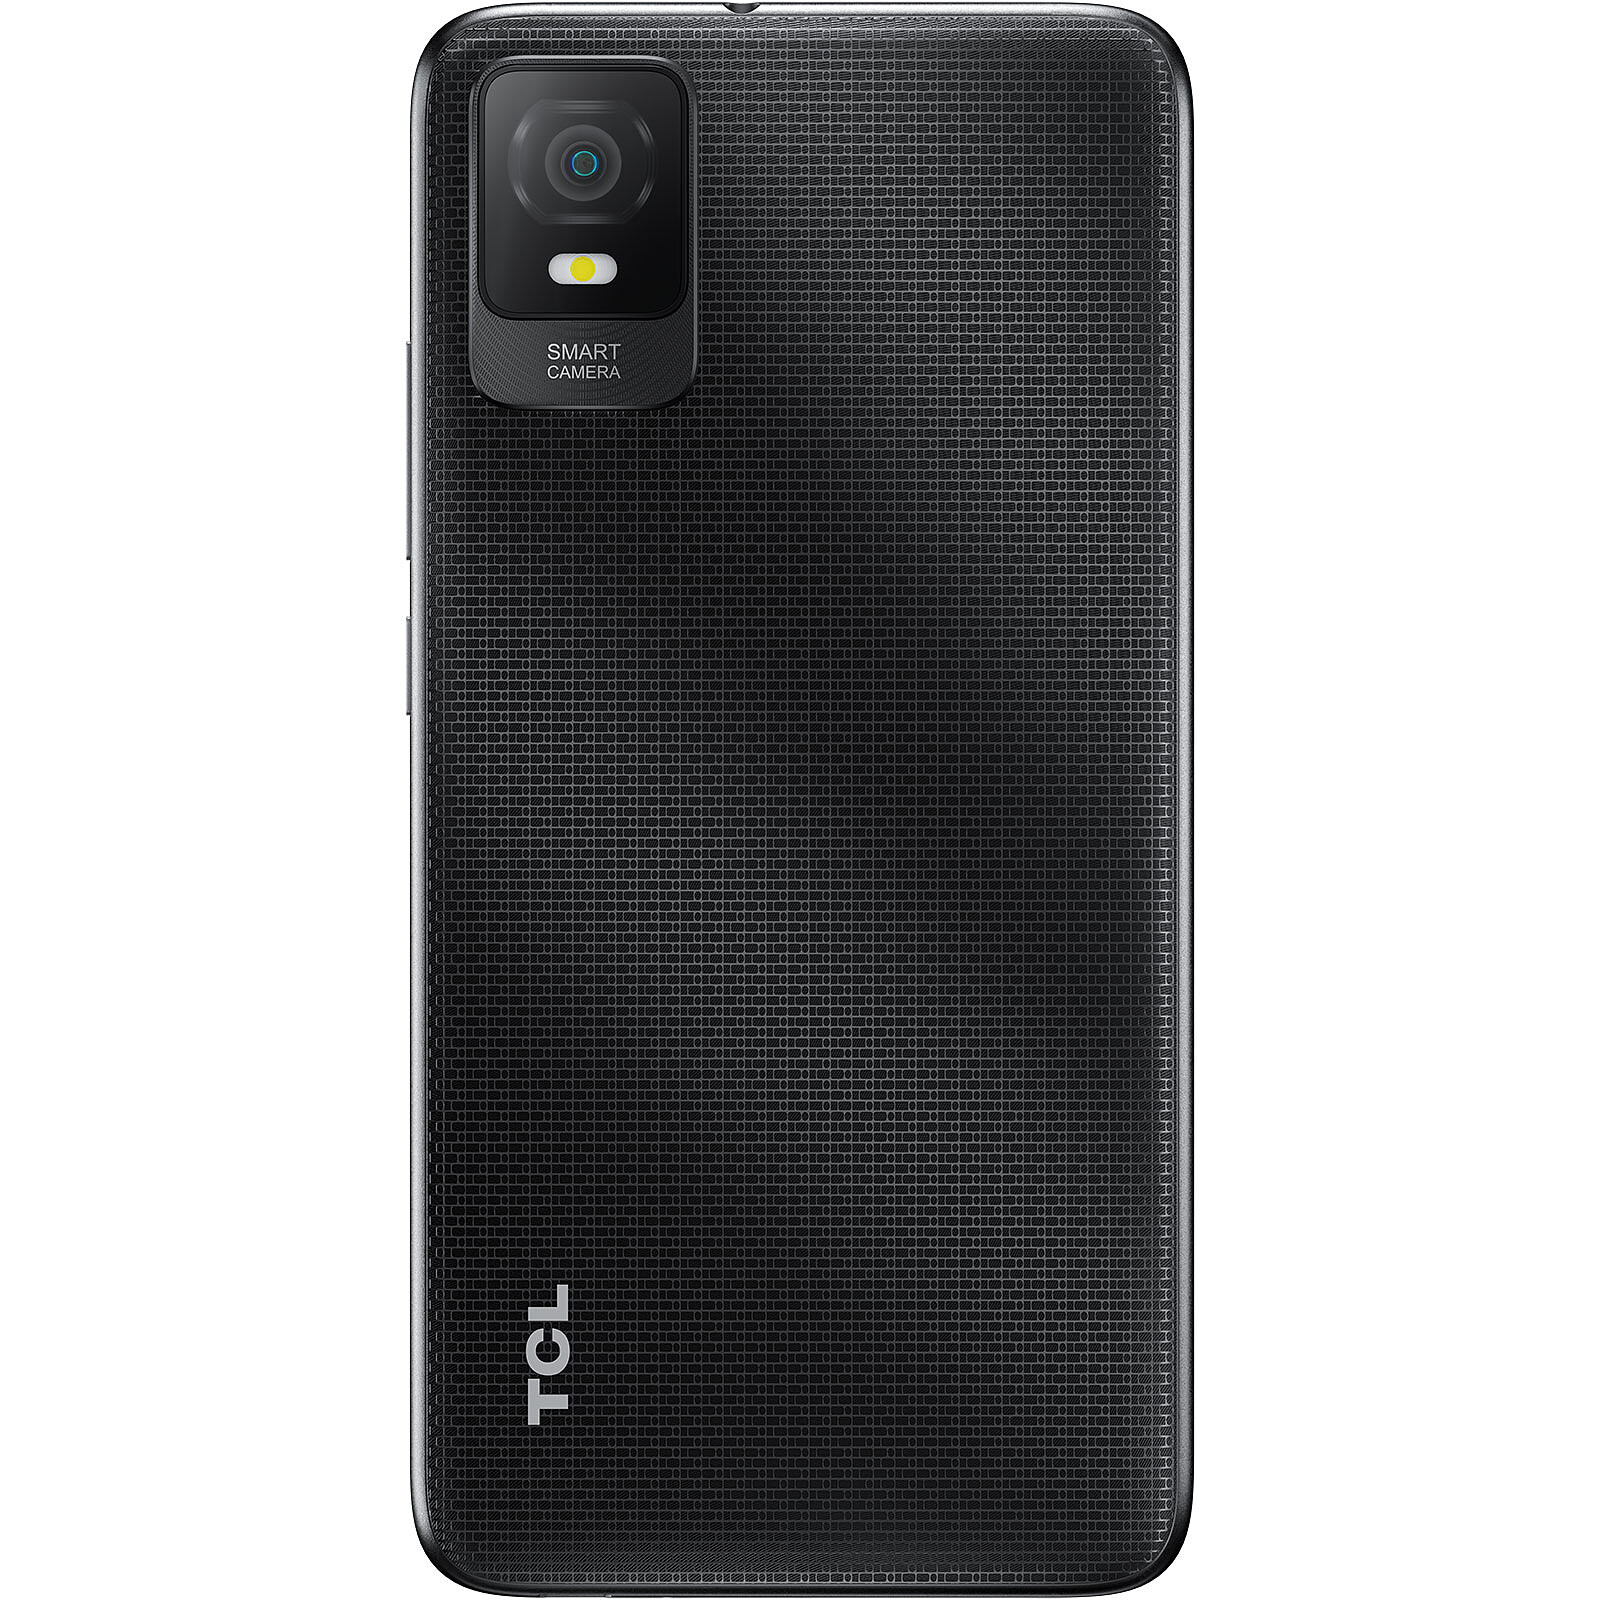 TCL 403 Black - Mobile phone & smartphone - LDLC 3-year warranty